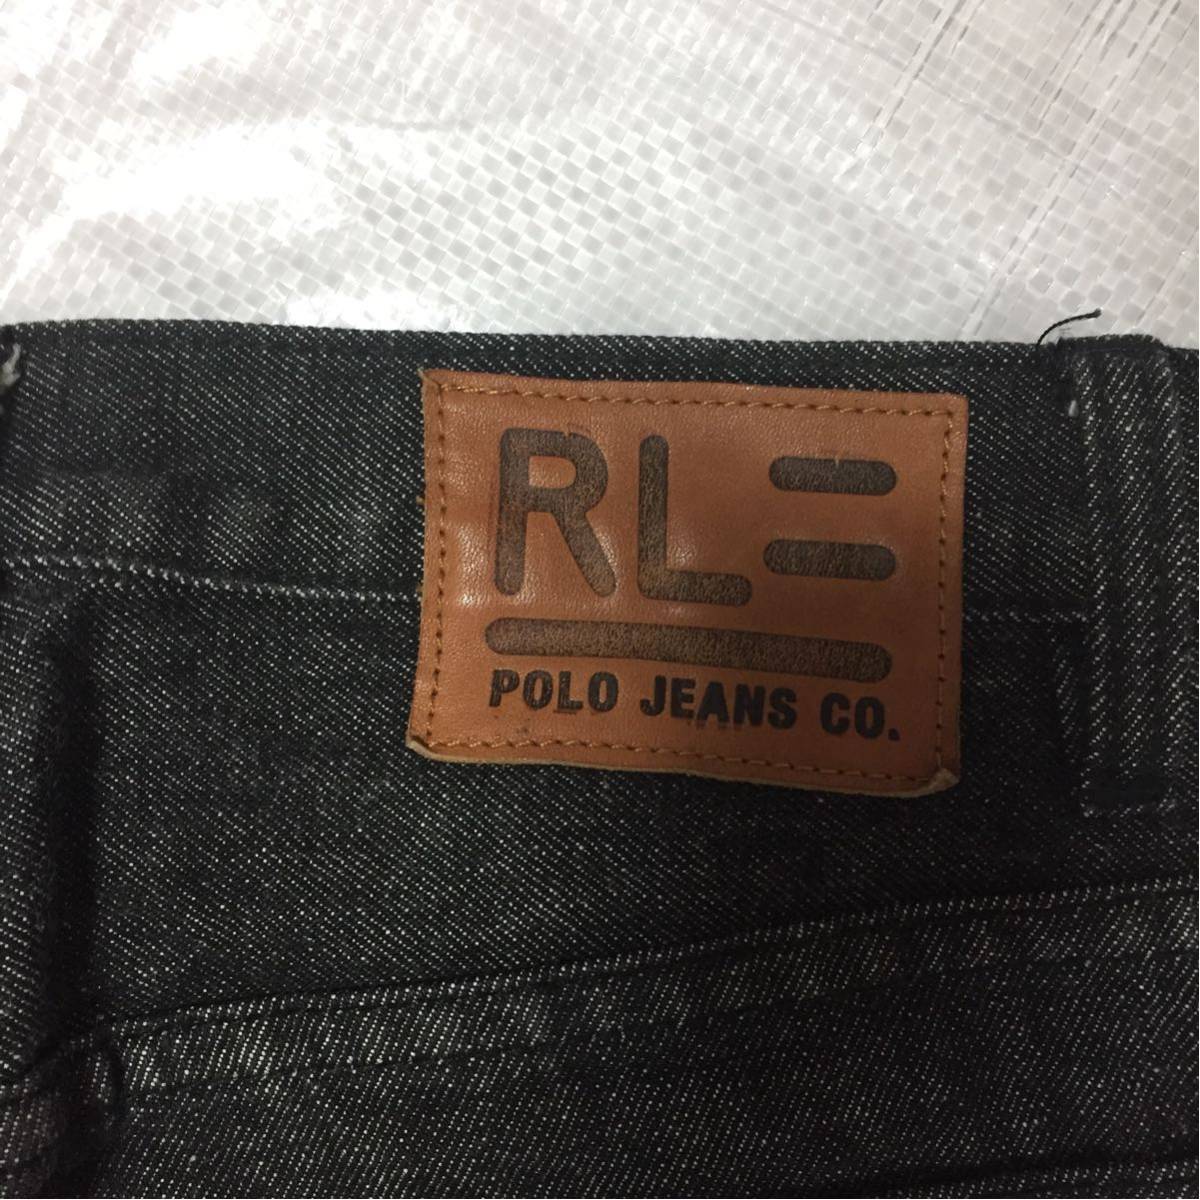  prompt decision * beautiful goods * Ralph Lauren POLO JEANS * waist approximately 74* size 28 secondhand goods 